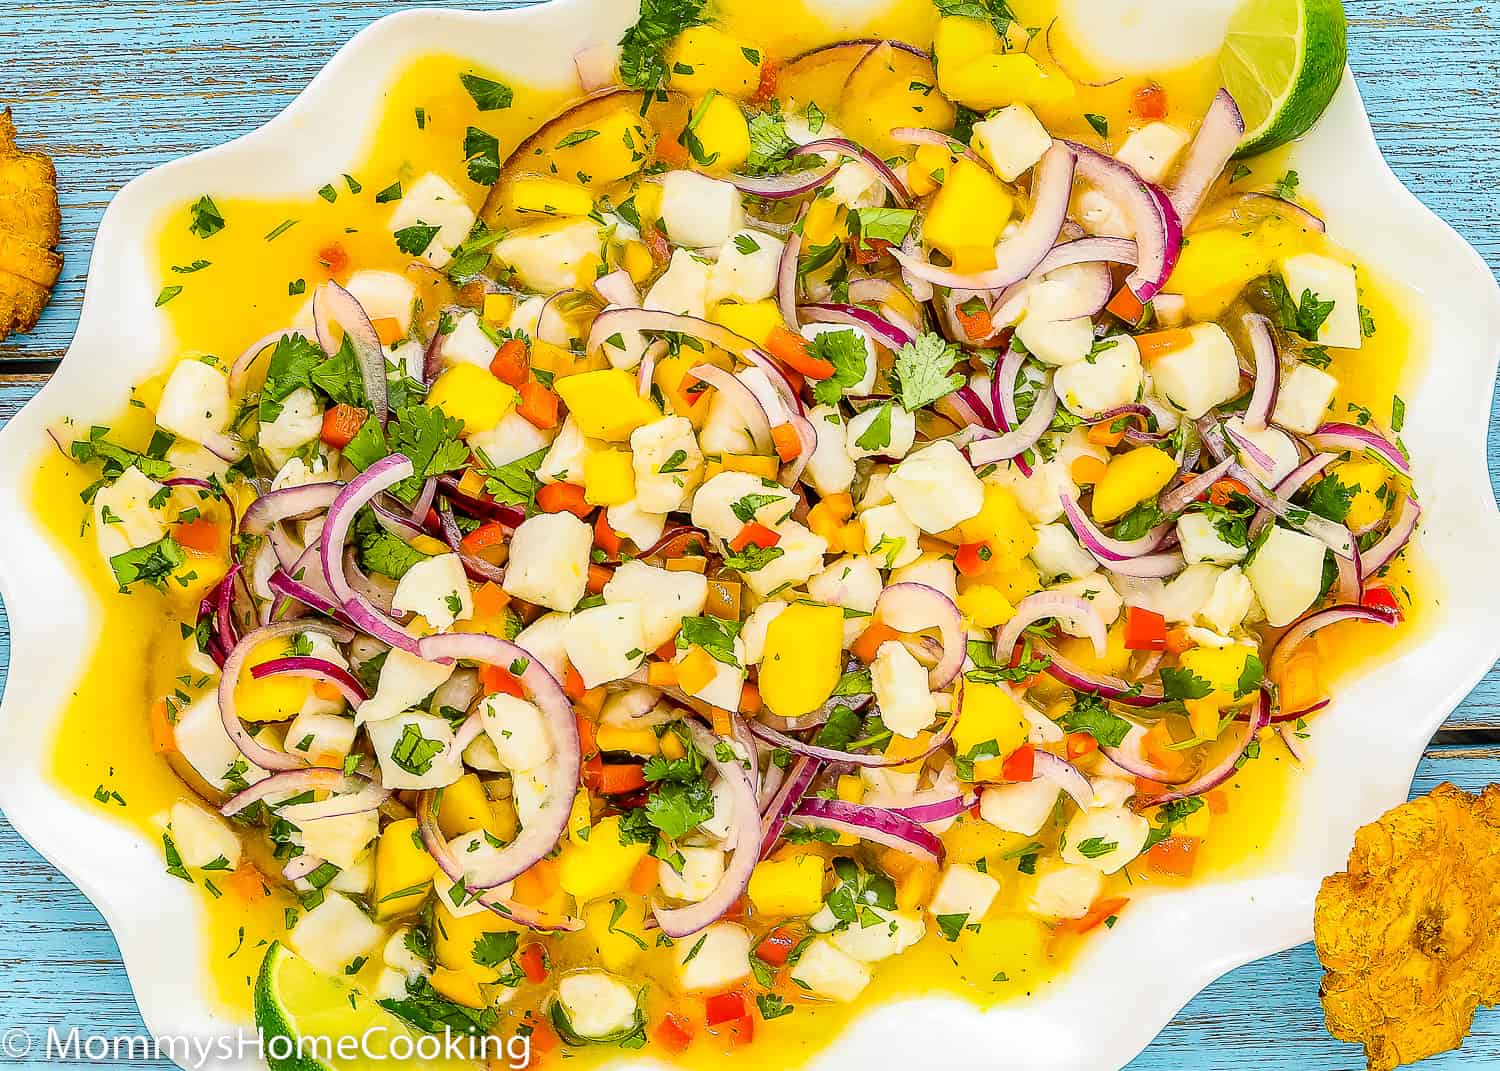 Fish ceviche with mango in a big serving plate.